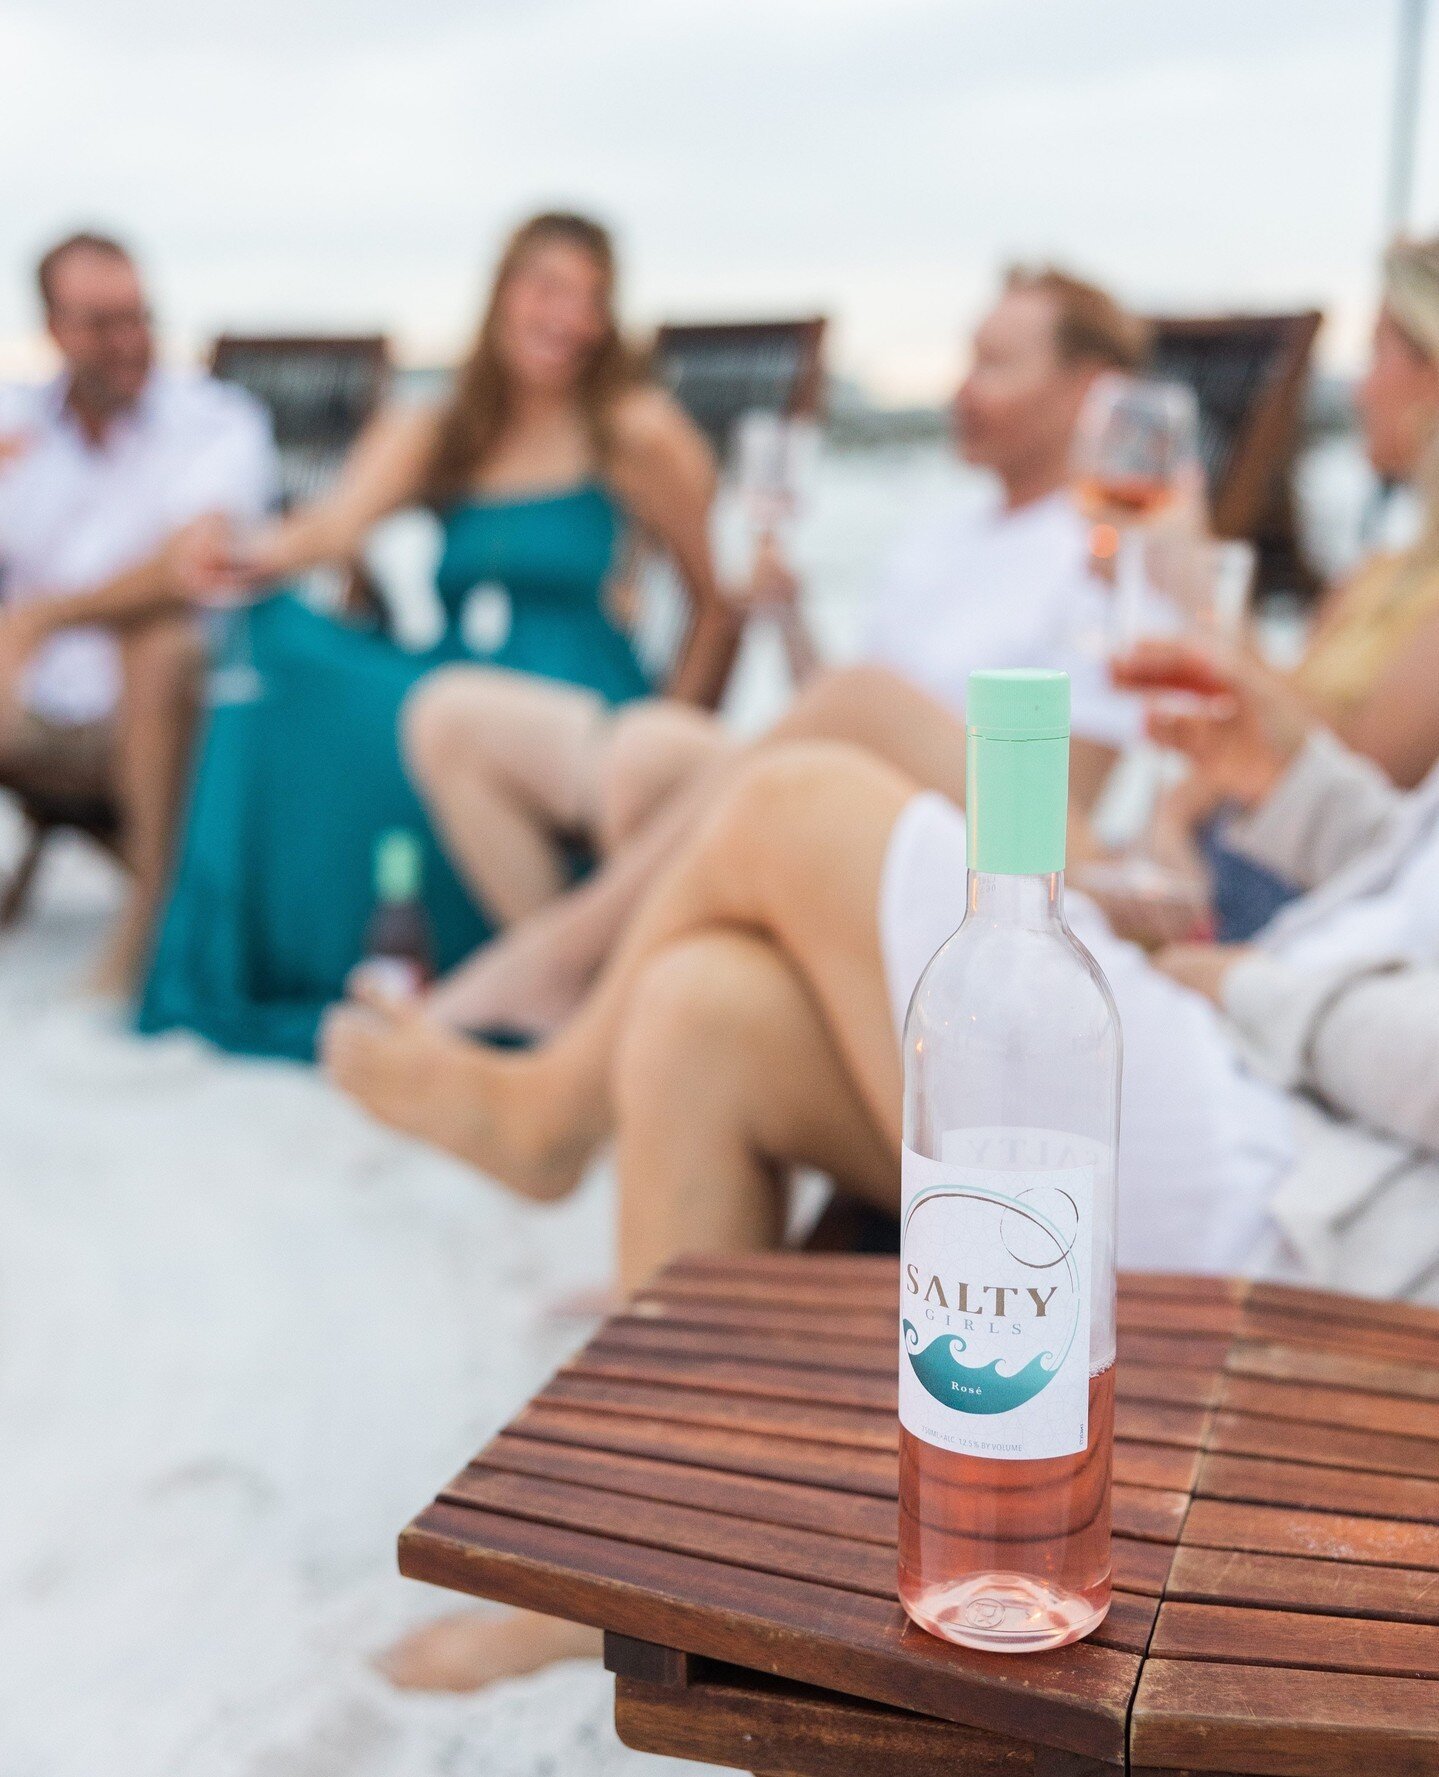 We live for nights like these 💫 ⁠
⁠
🥂 Get yours ➡️ saltybeverages.com⁠
⁠
#sipsalty #winelover #30a #rosewine #floridalife #beachlife #beachvibes #vin #ros&eacute; #vinros&eacute; #wine #frenchwine #winelovers #winetime #winewinewine #roseallday #wi